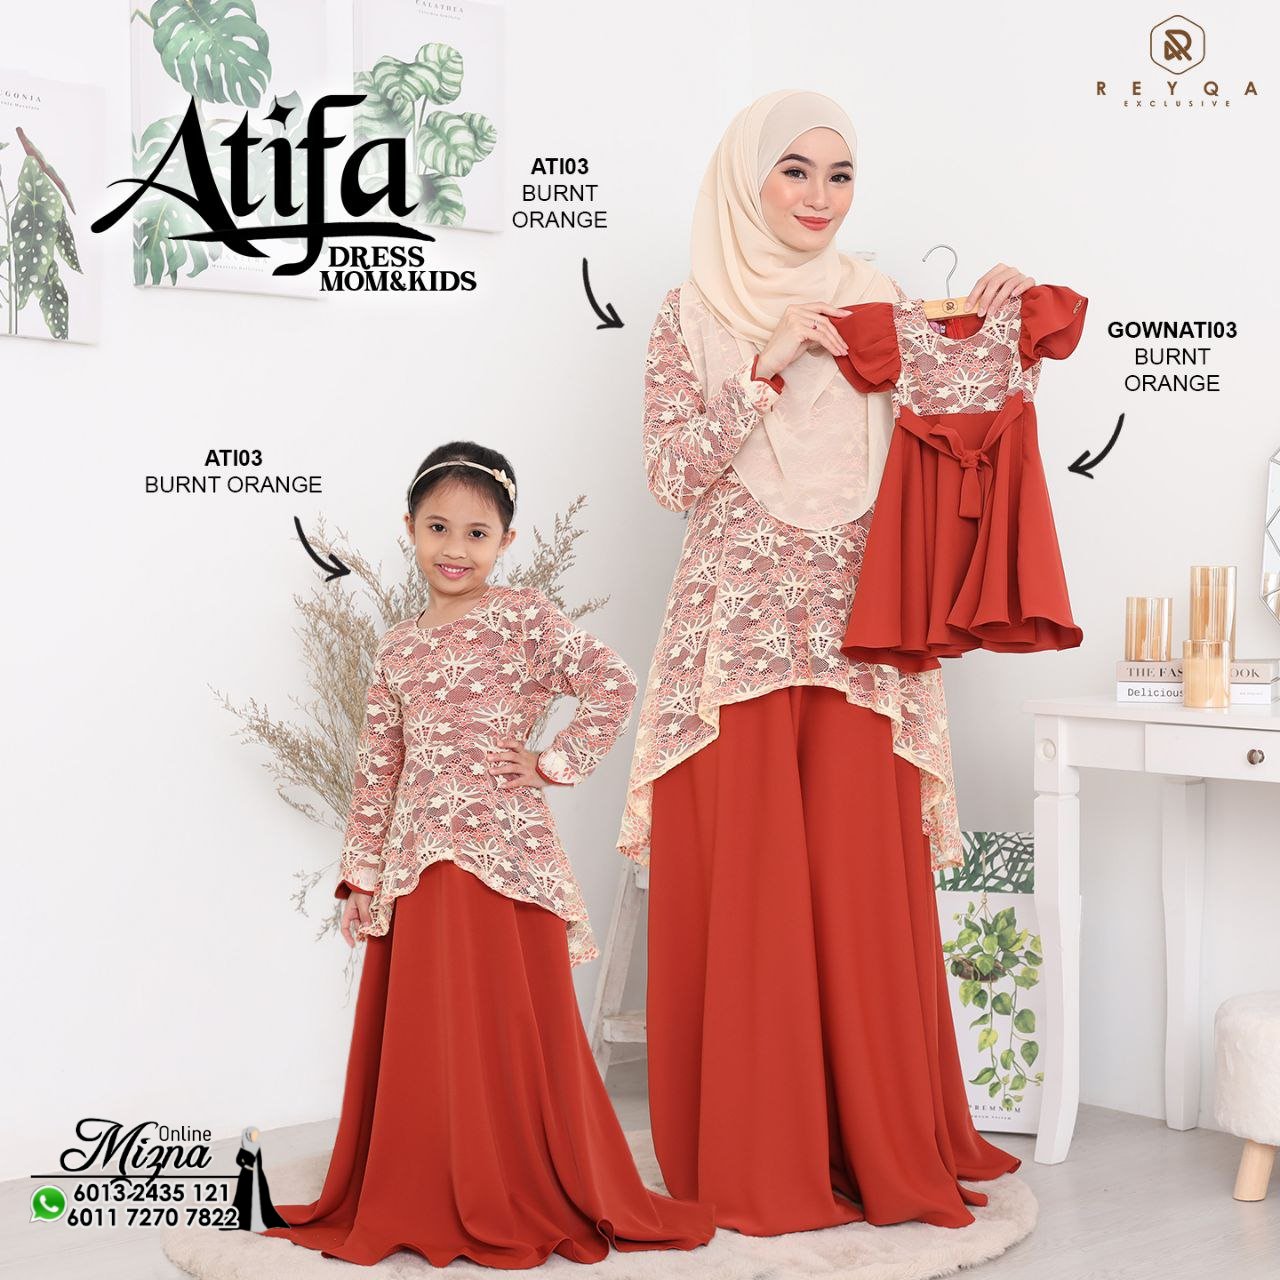 DRESS COLLECTIONS, JUBAH COLLECTIONS, LACE PRINCESS DRESS, PRINCESS DRESS, LACE DRESS, DRESS SEDONDON, DRESS IBU DAN ANAK, MOM AND KIDS DRESS, BABY DRESS, BABY GOWN, KIDS DRESS, DRESS KANAK-KANAK, MUSLIMAH DRESS, MUSLIMAH JUBAH DRESS